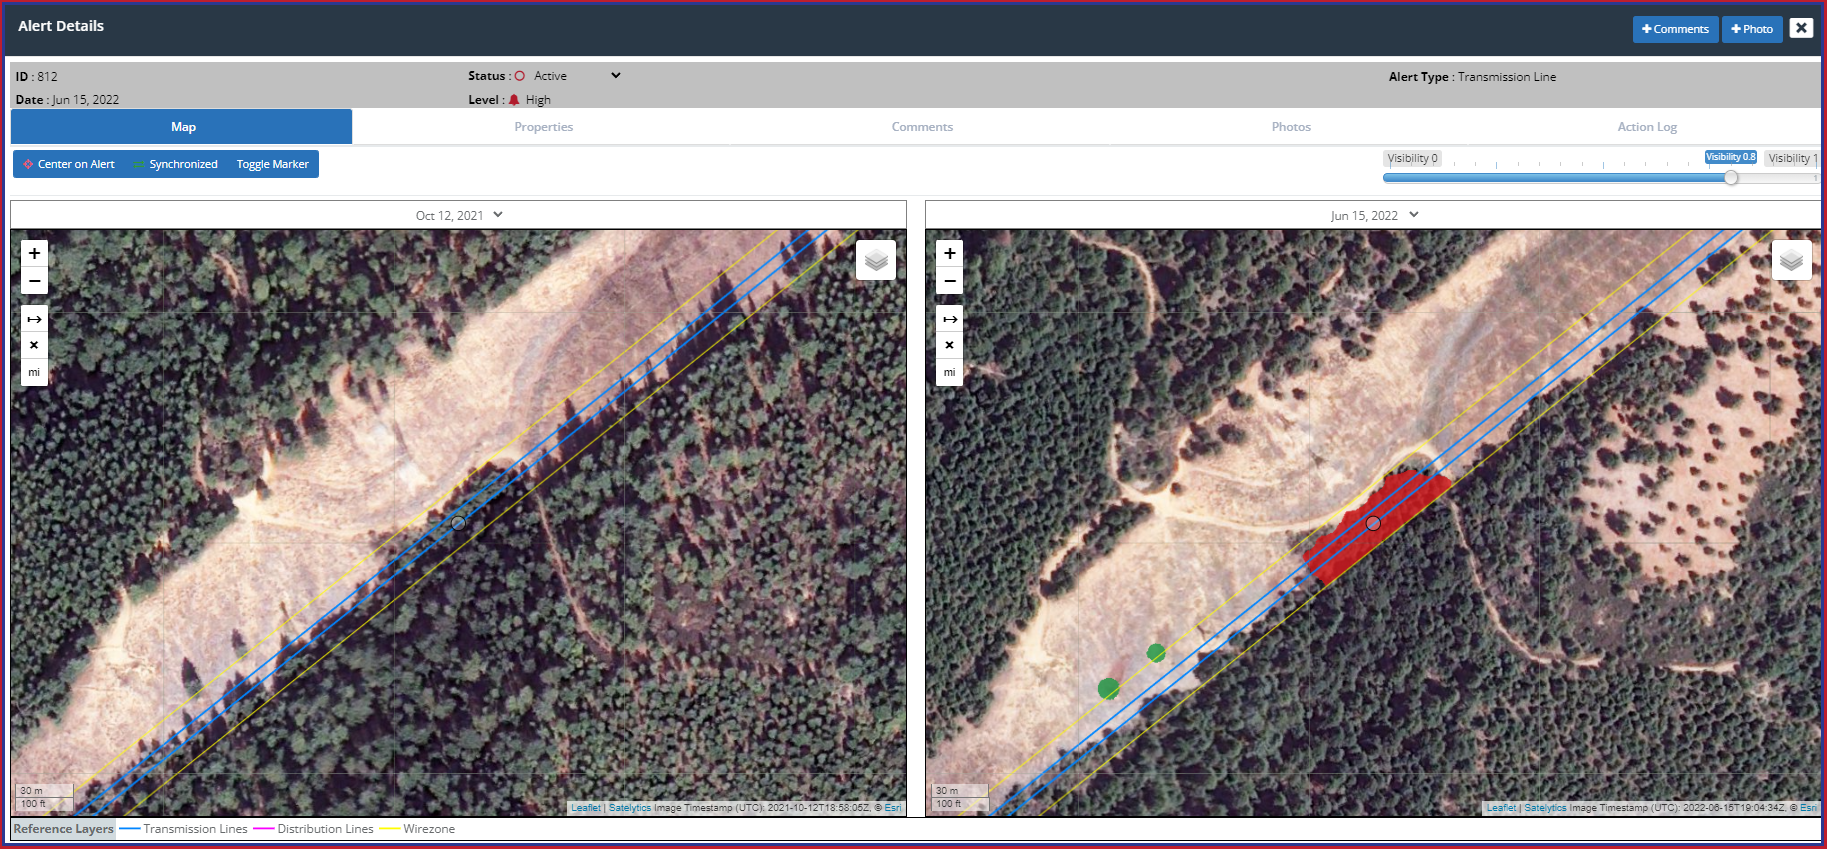 Work verification survey (right) shows which trees were removed (green dots) and which were not (red area).